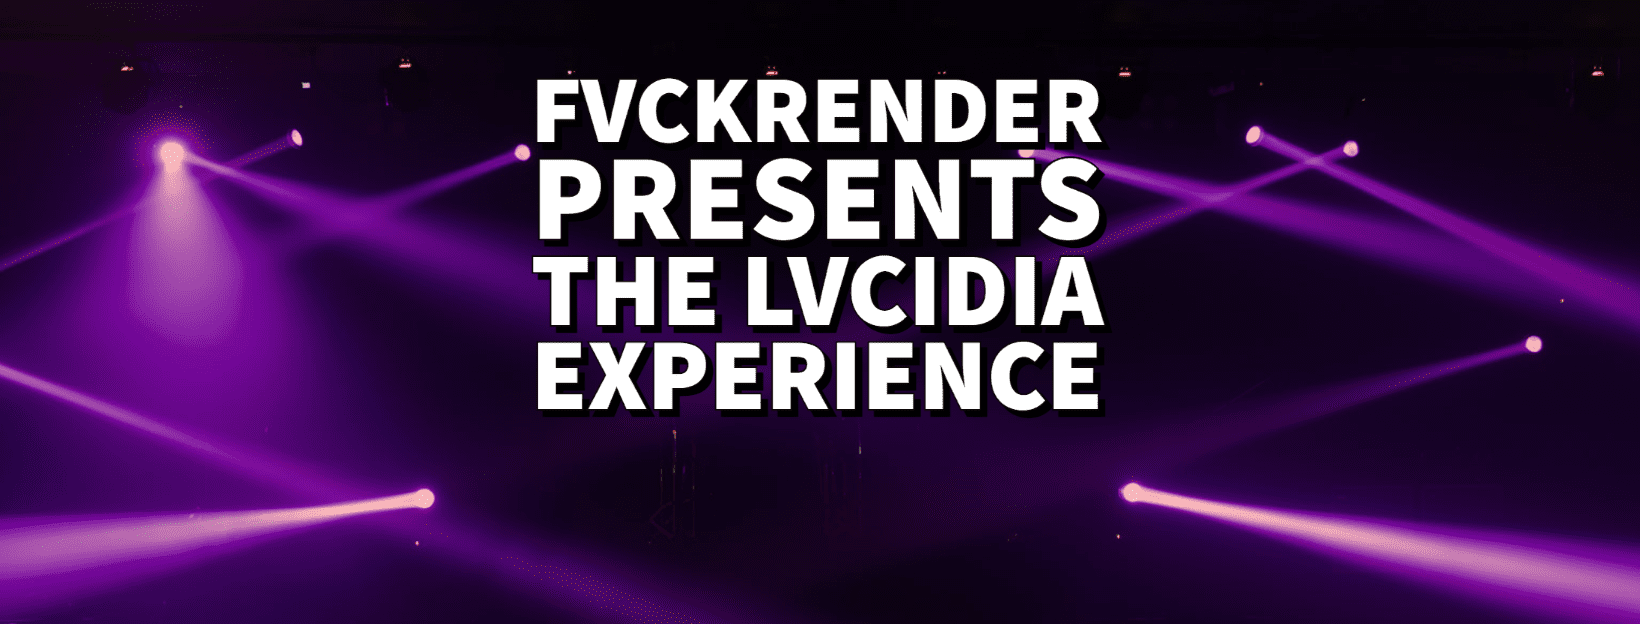 FVCKRENDER presents The LVCIDIA Experience at NFT.NYC